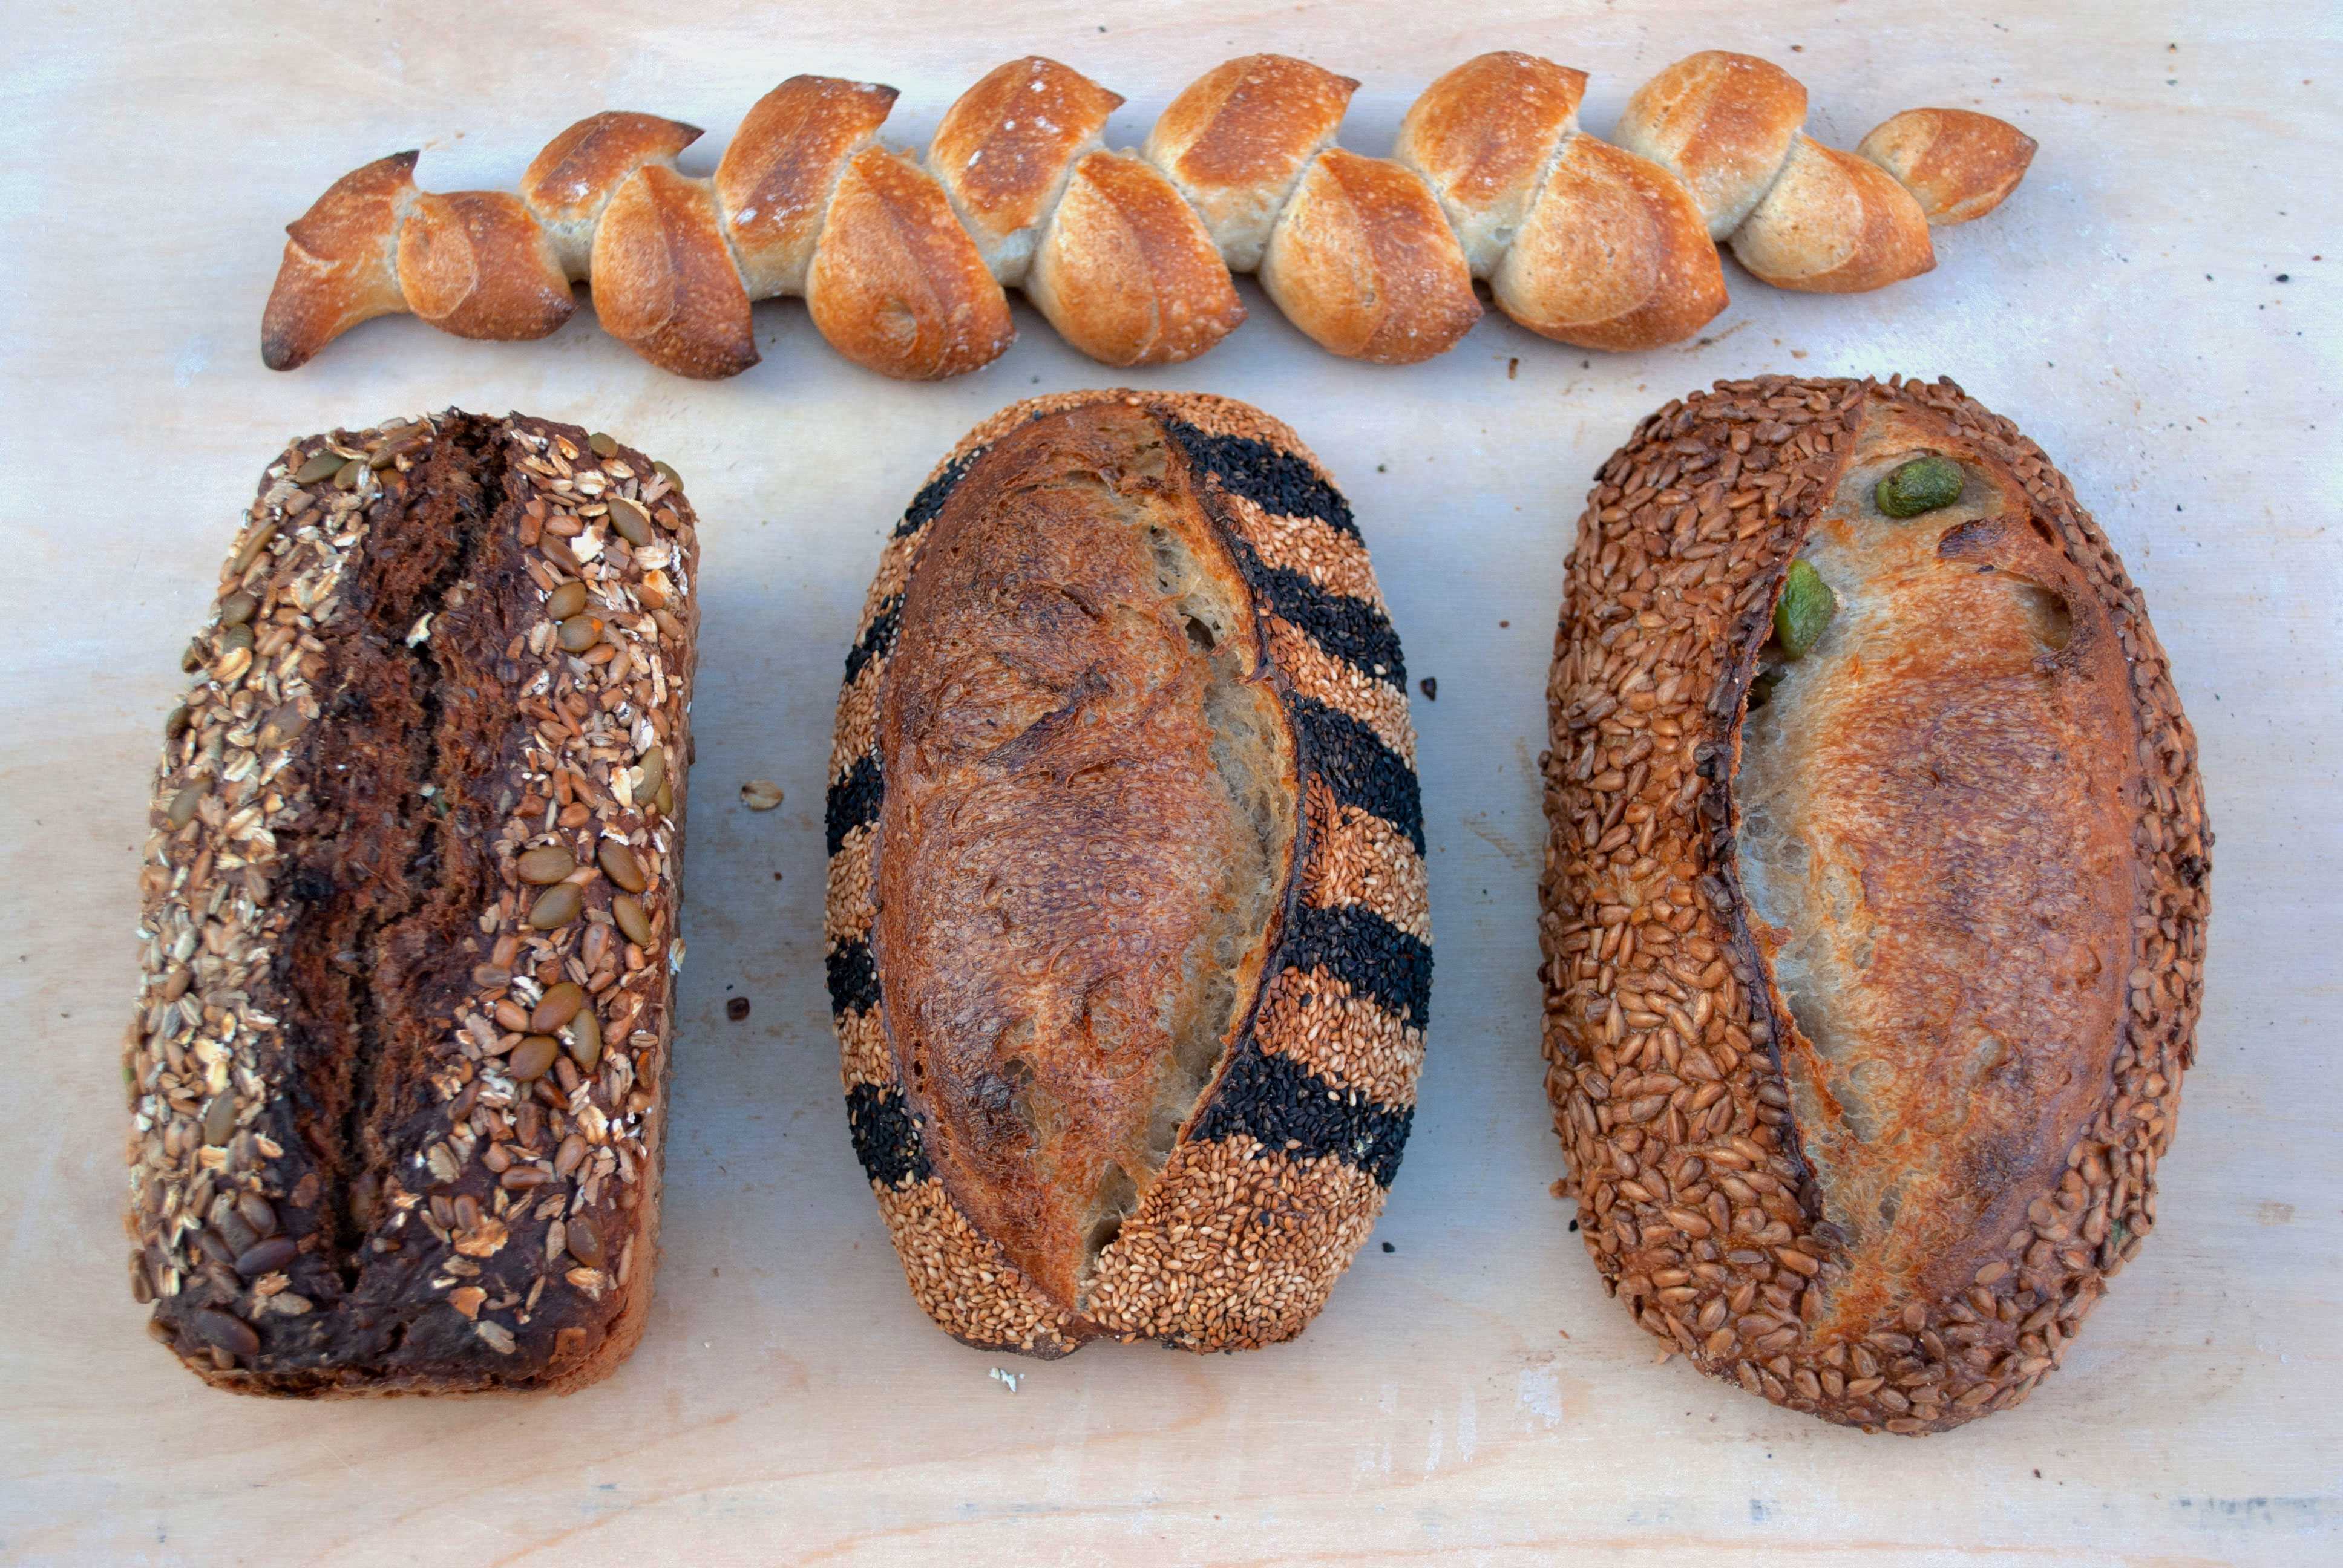 A spread of bread from Mel the Bakery.